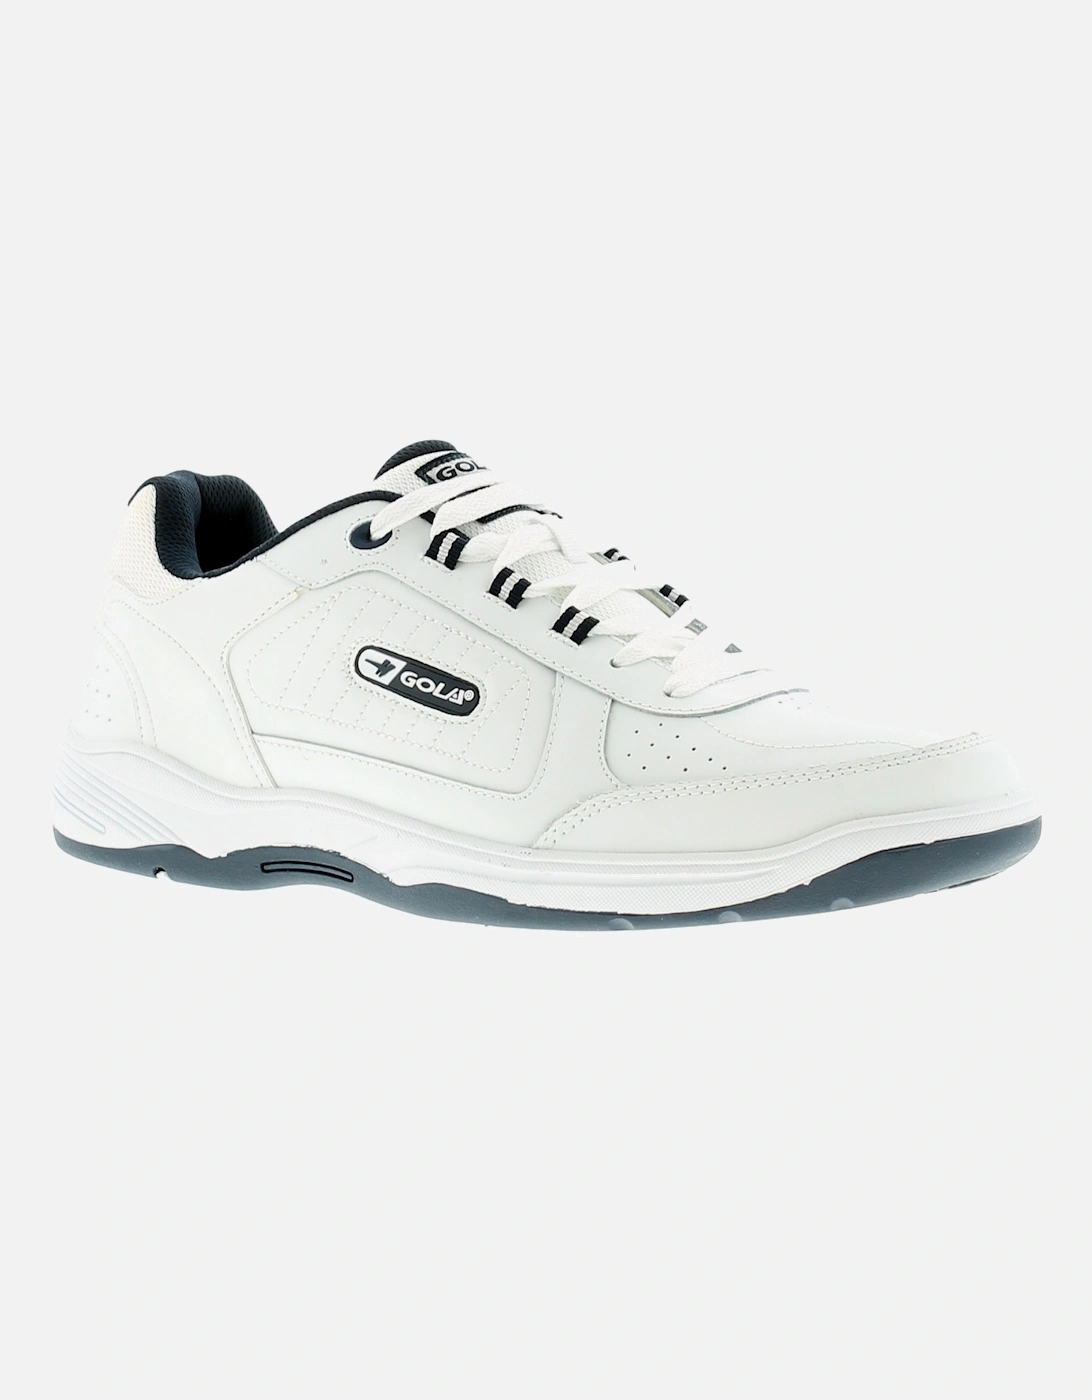 Mens Trainers Belmont Widefit xl Lace Up white UK Size, 6 of 5